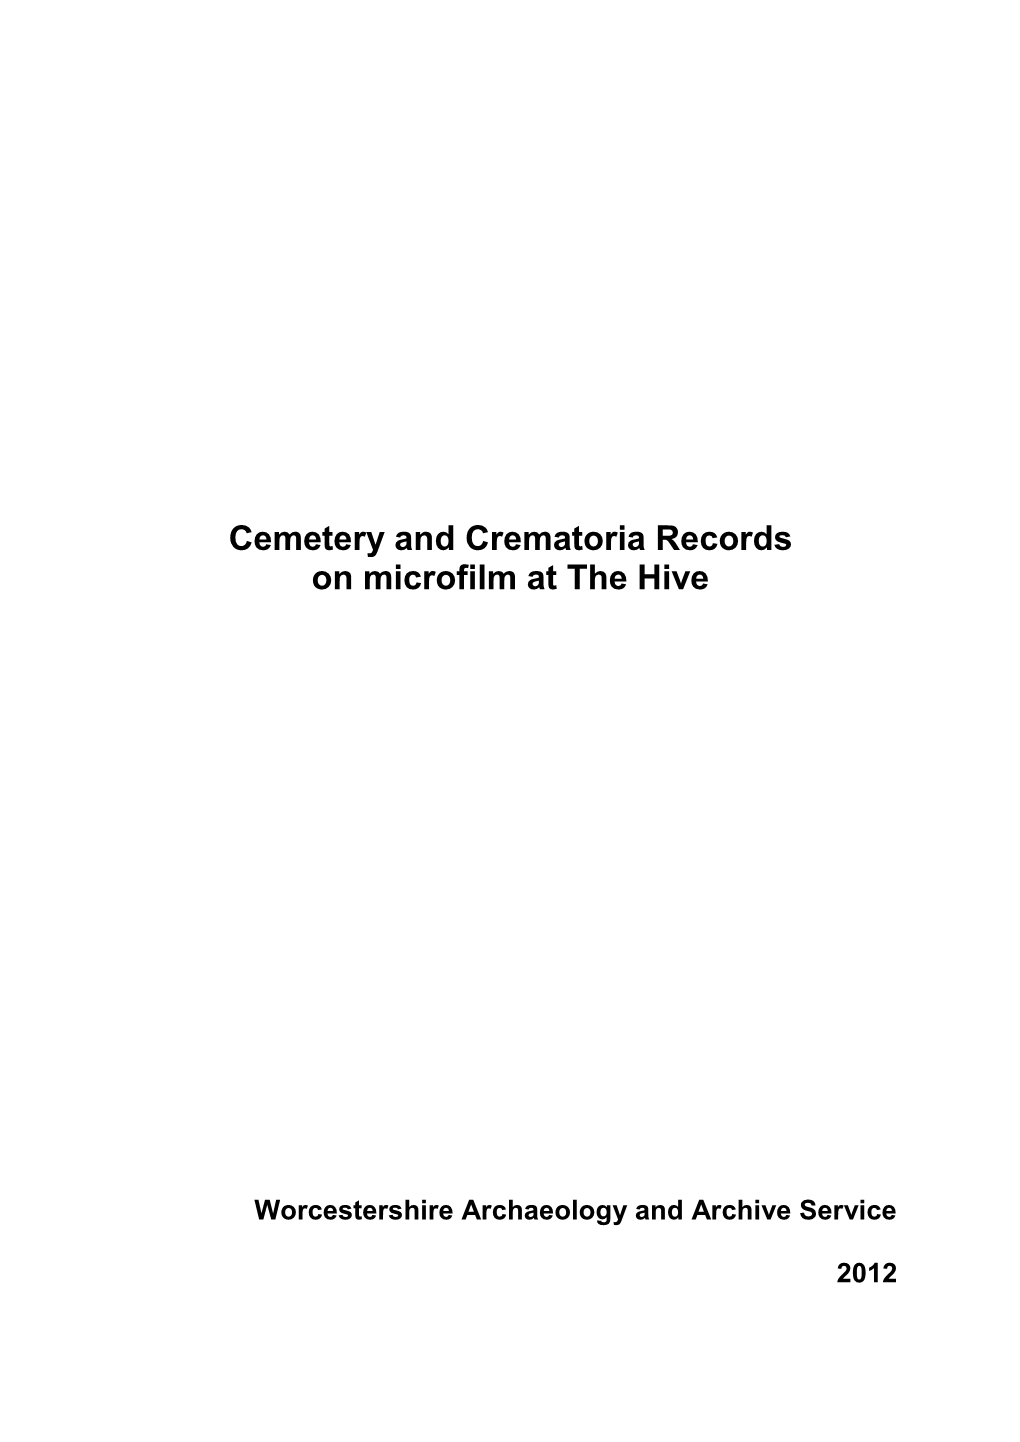 Cemetery and Crematoria Records on Microfilm at the Hive